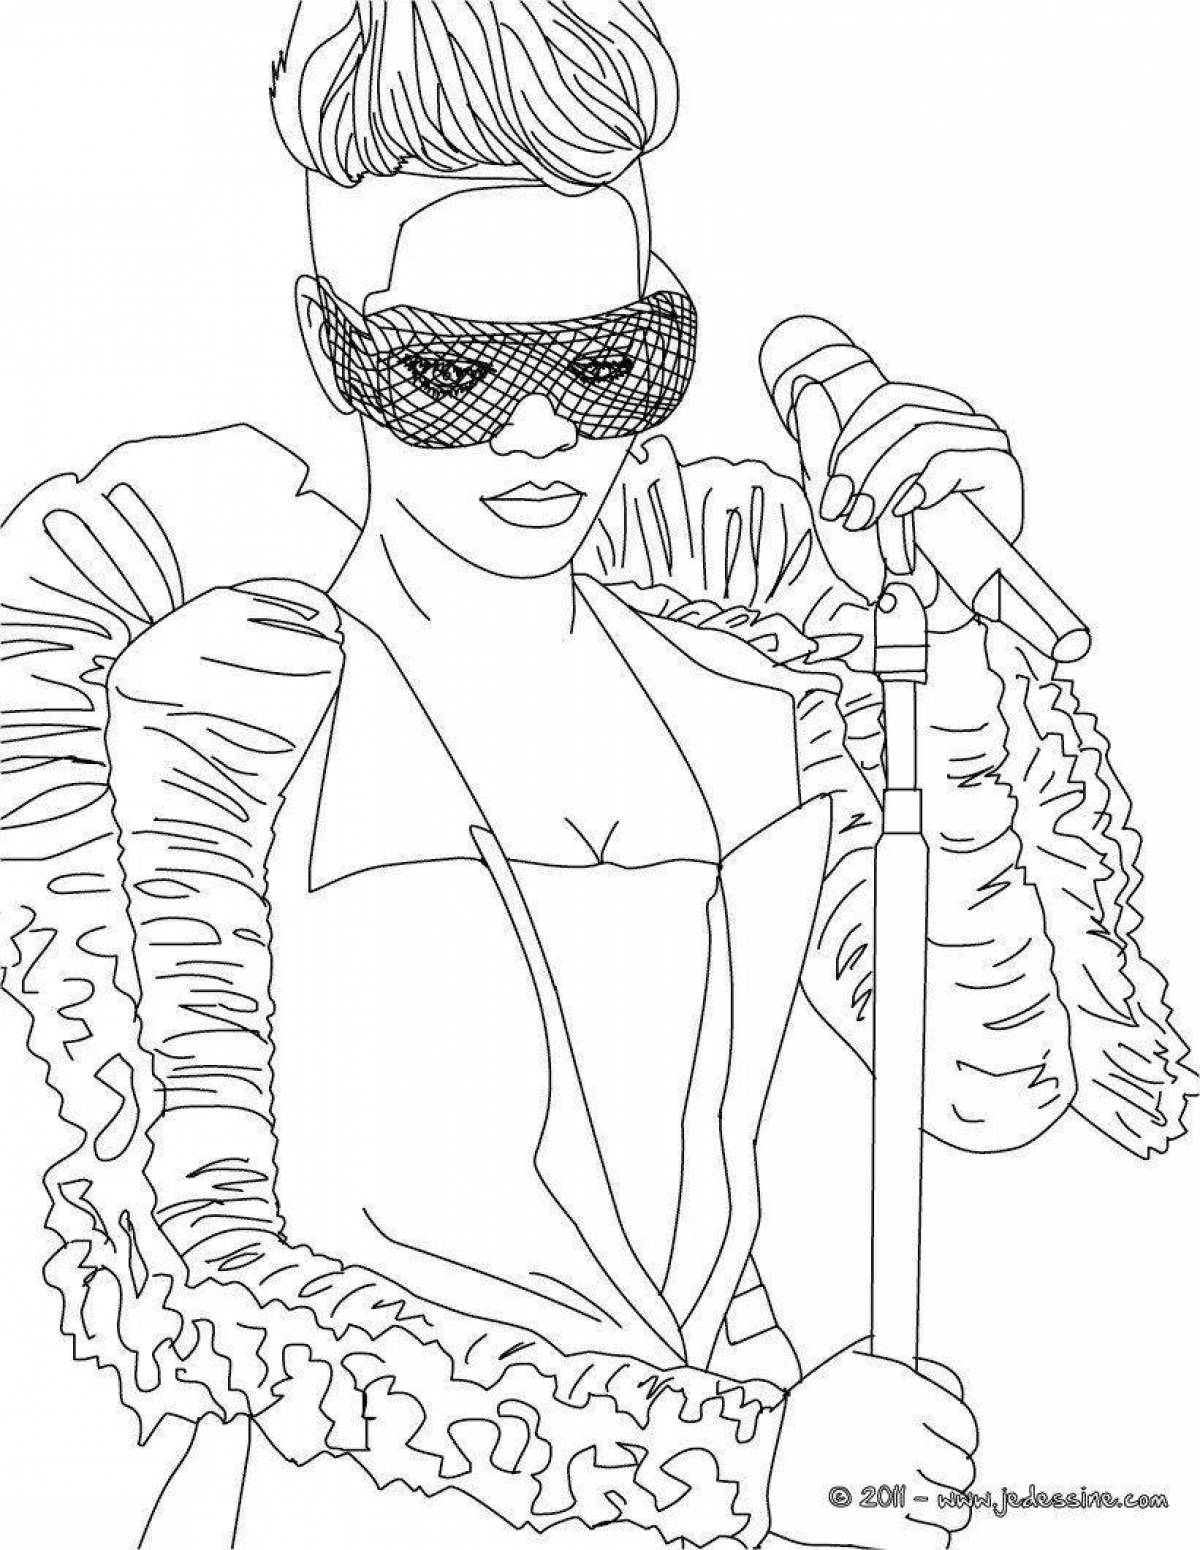 Rihanna fairytale coloring page